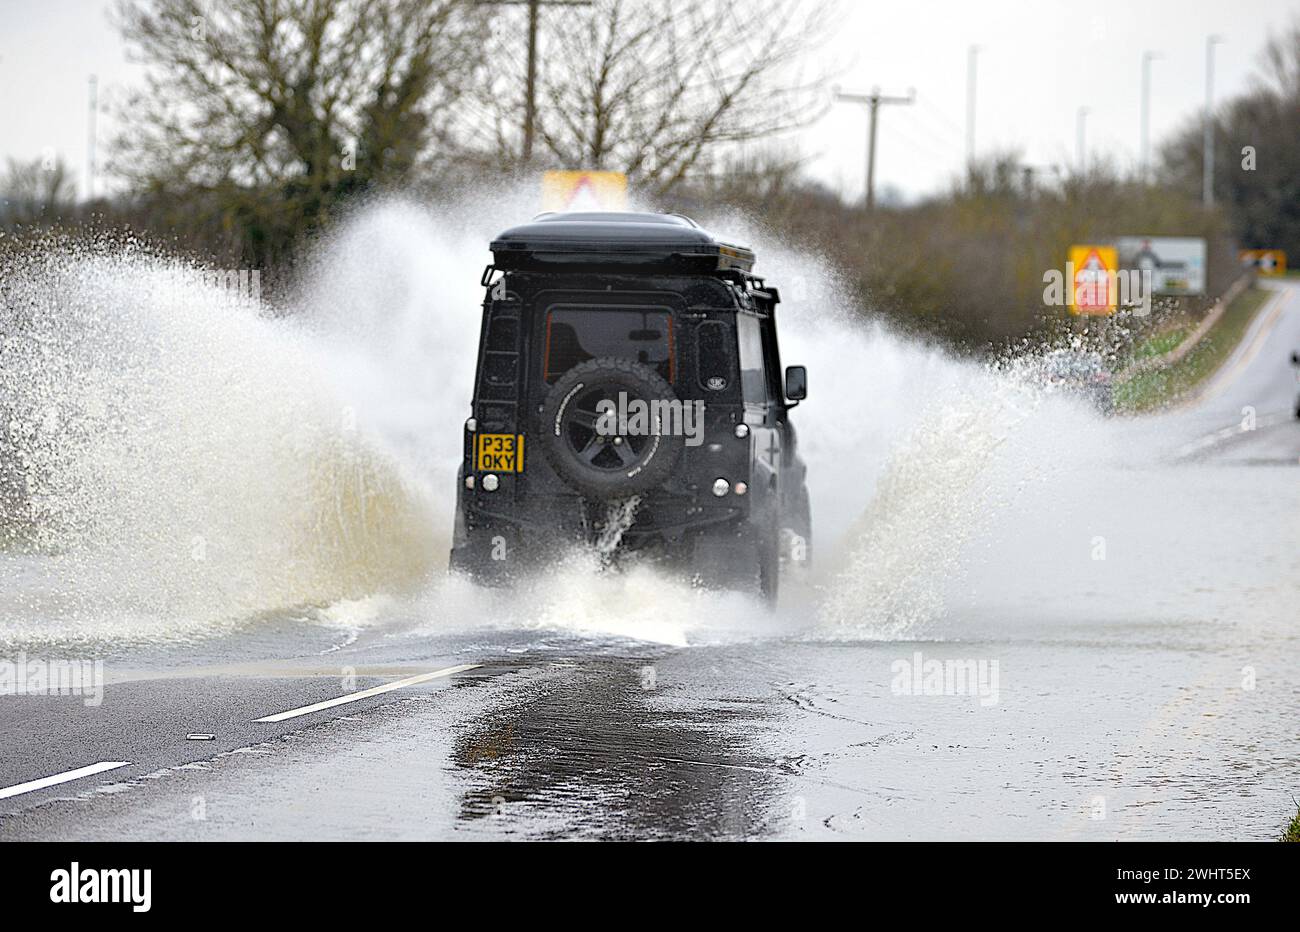 Mountsorrel, Leicestershire, UK, 11th February 2024.  Vehicles negotiate floodwater on Granite Way, Mountsorrel, Leicestershire. Leicestershire still struggles to recover from the rains with widespread flooding. Credit: Chris De Bretton-Gordon / Alamy Live News. Stock Photo